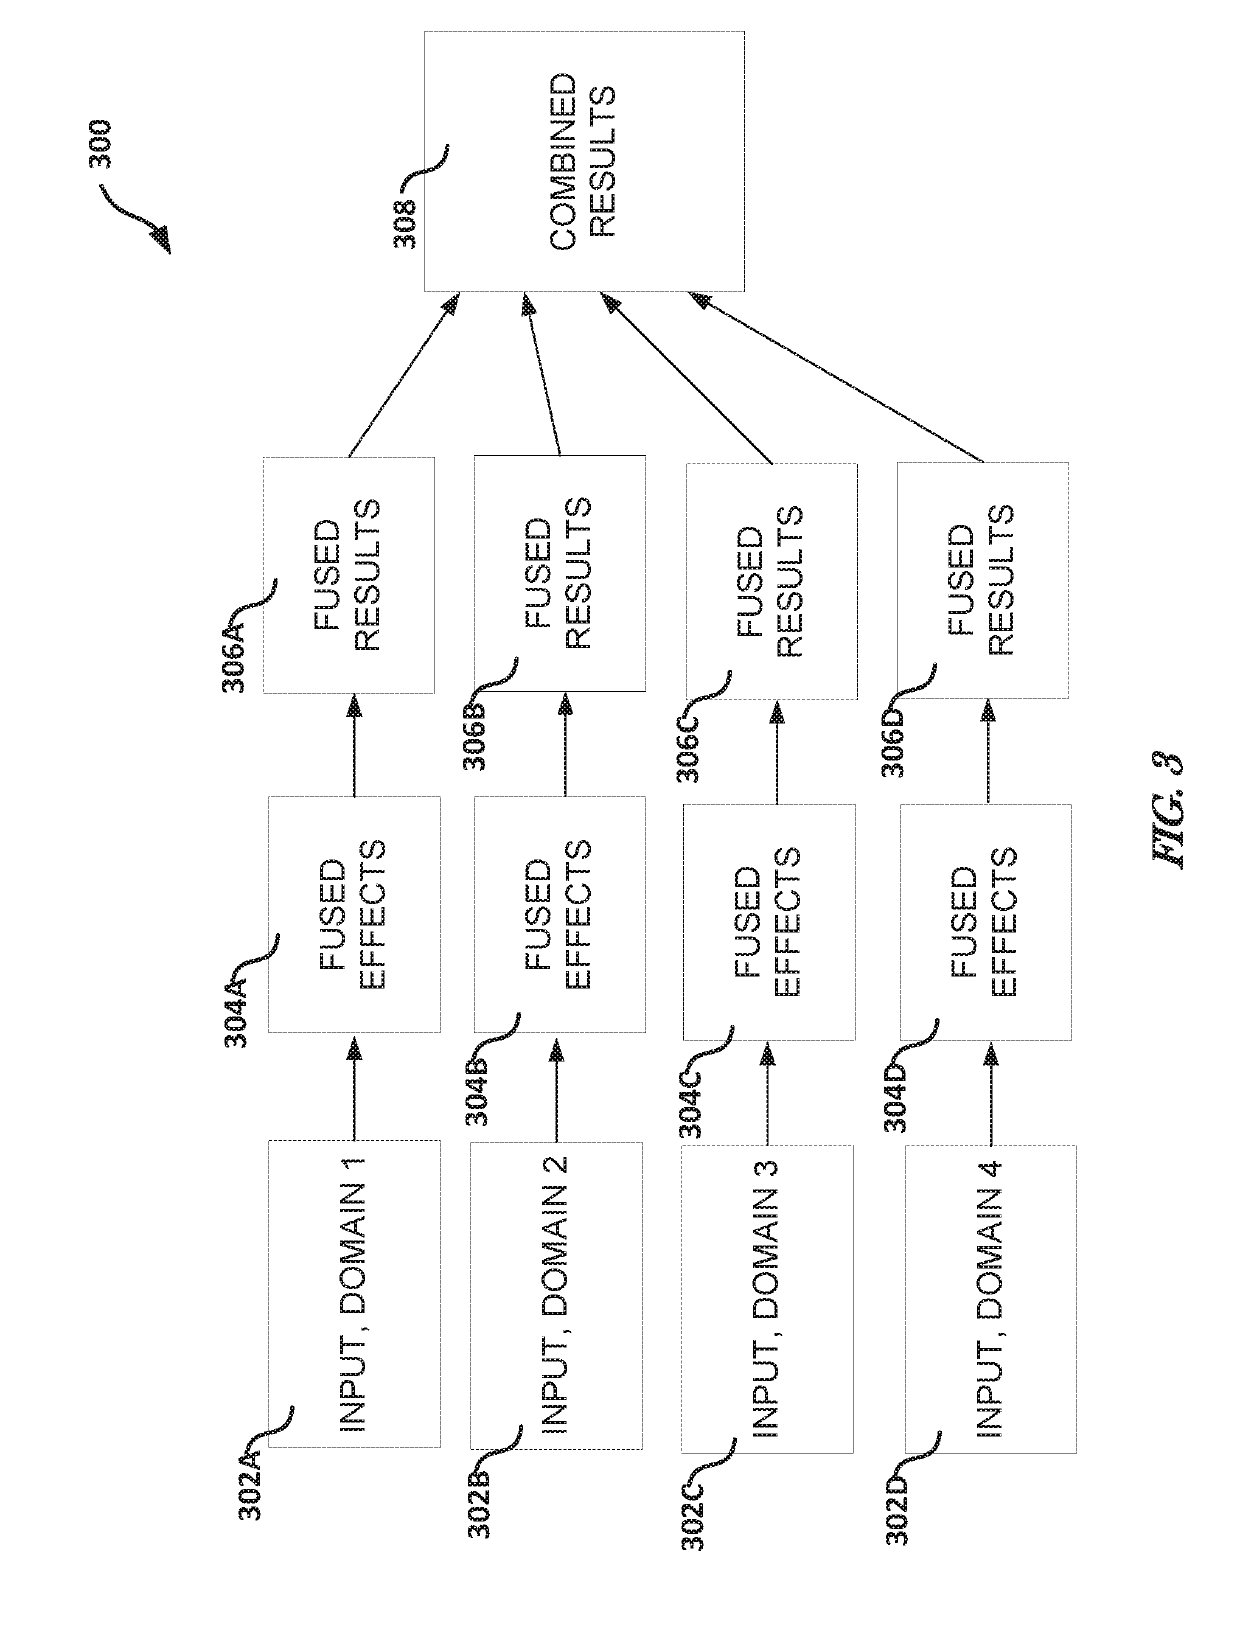 Methods and apparatus for hazard abatement using normalized effect analysis